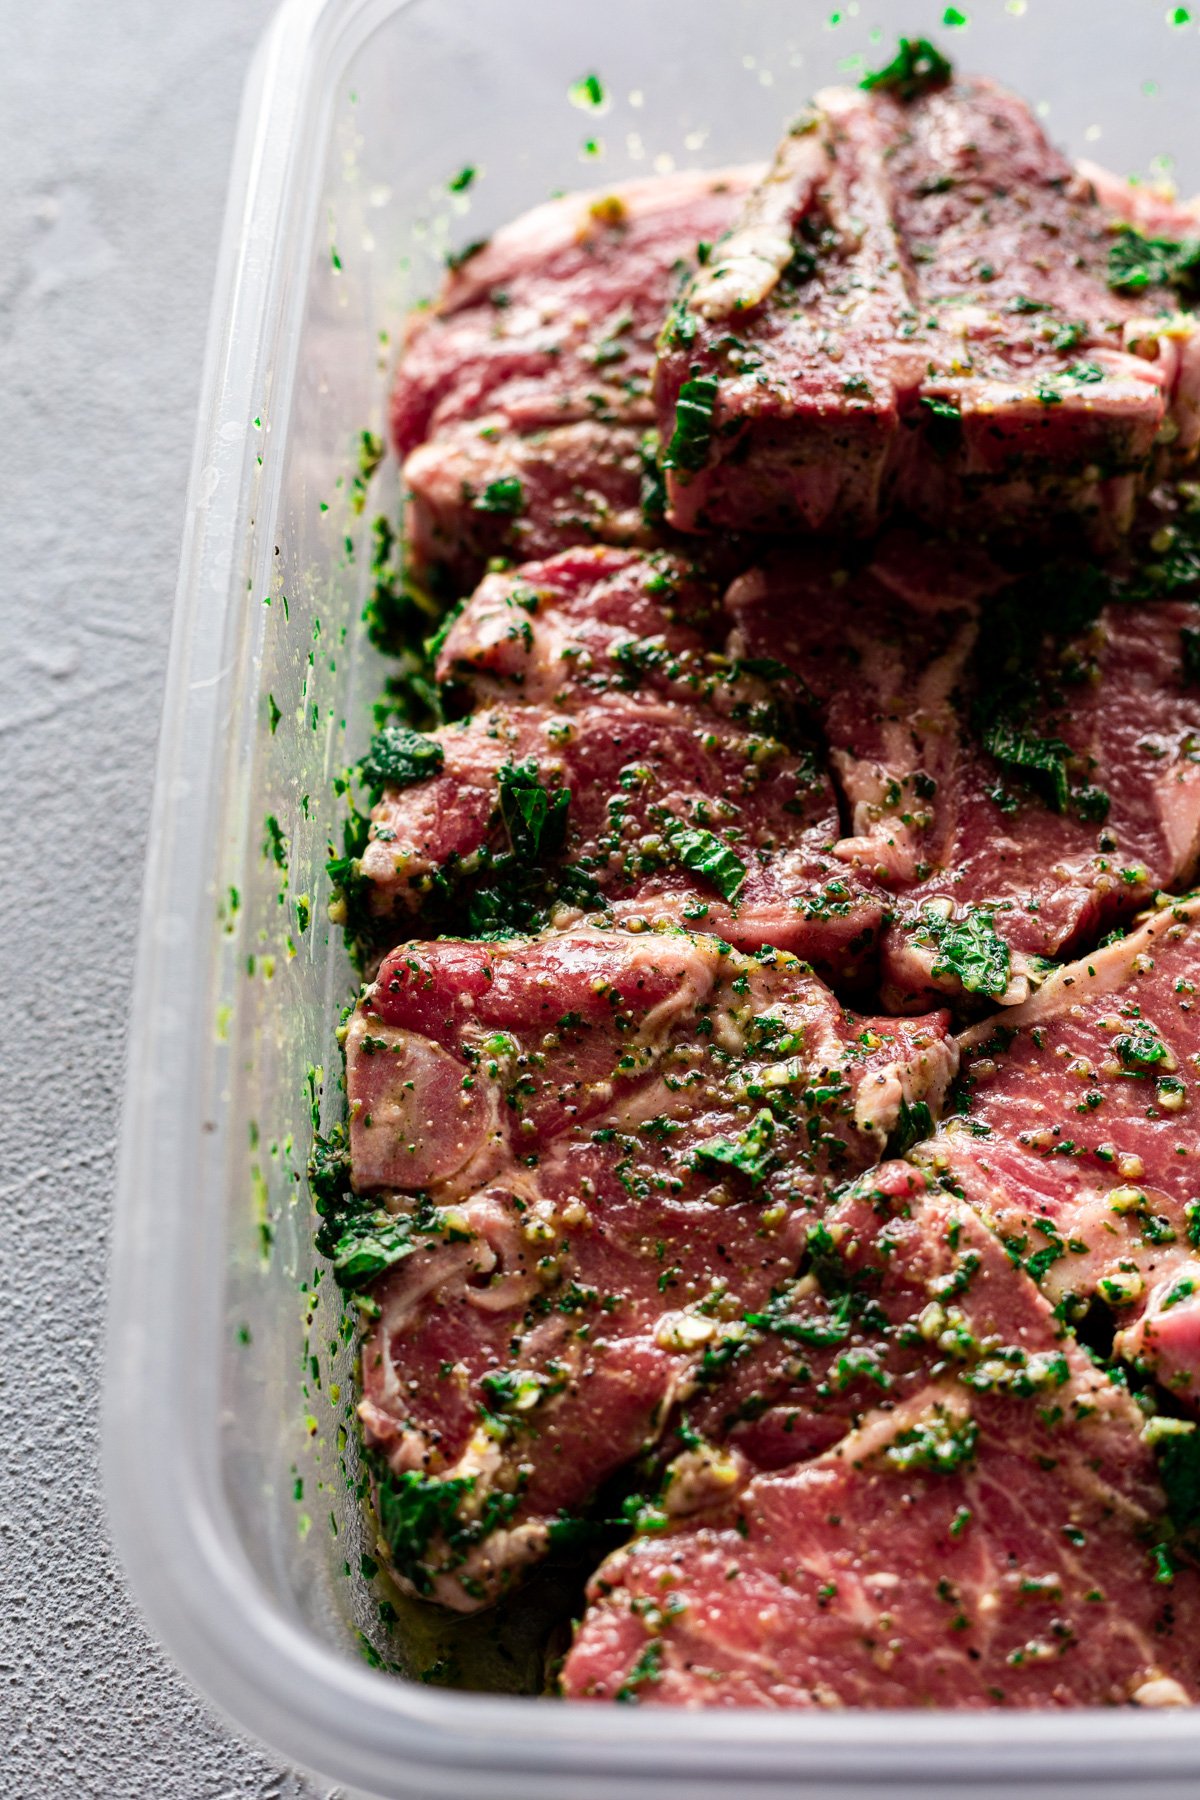 mint-schug marinated lamb chops in a tub before being grilled